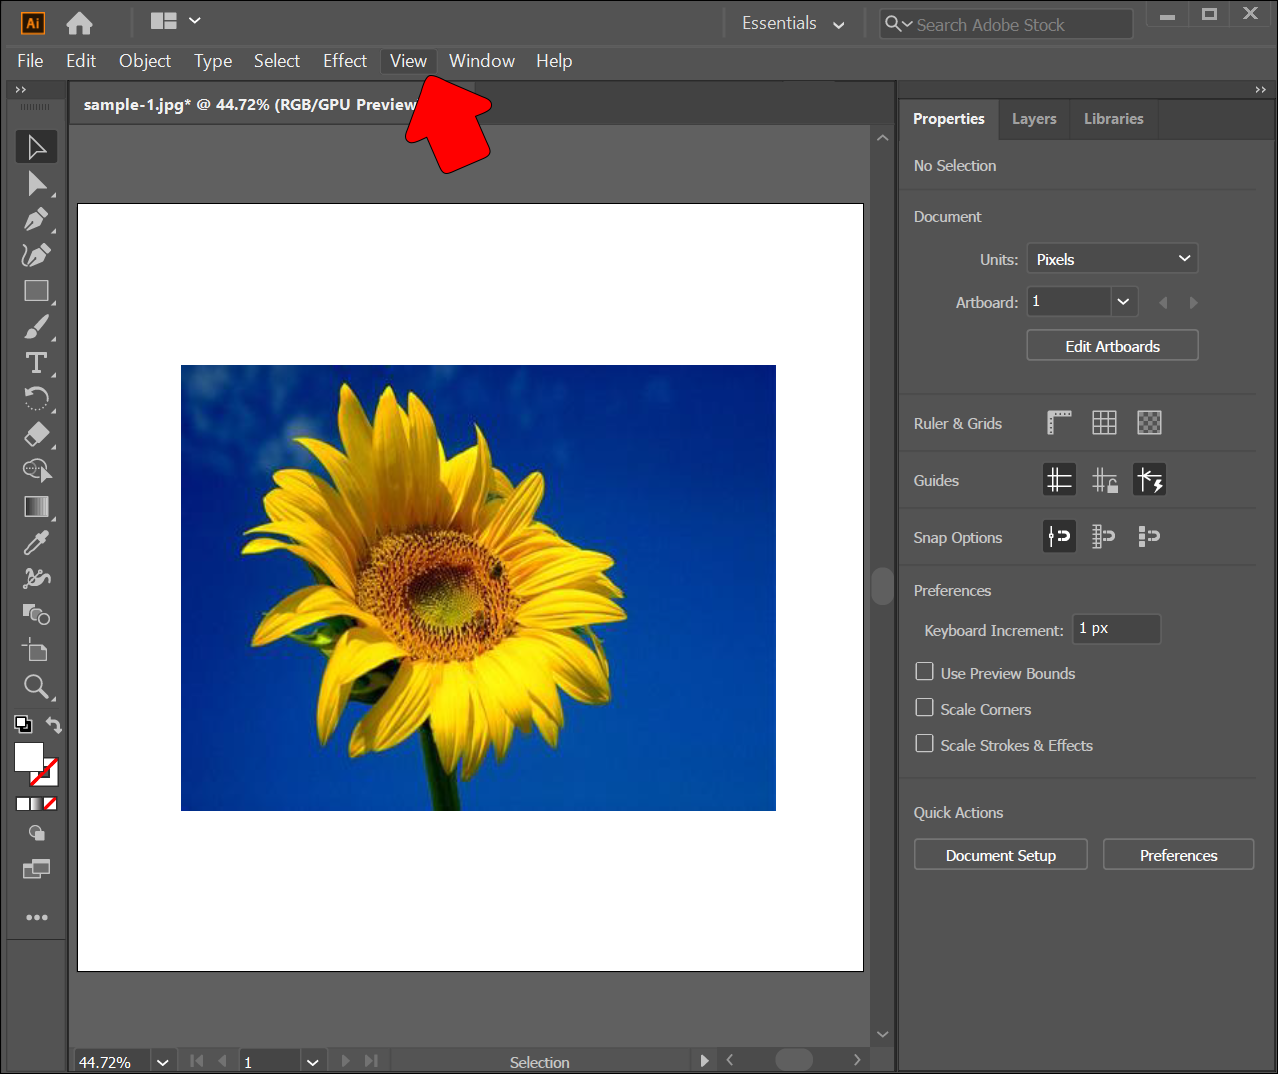 Art:How to get a transparent background using Photo Editor - YPPedia